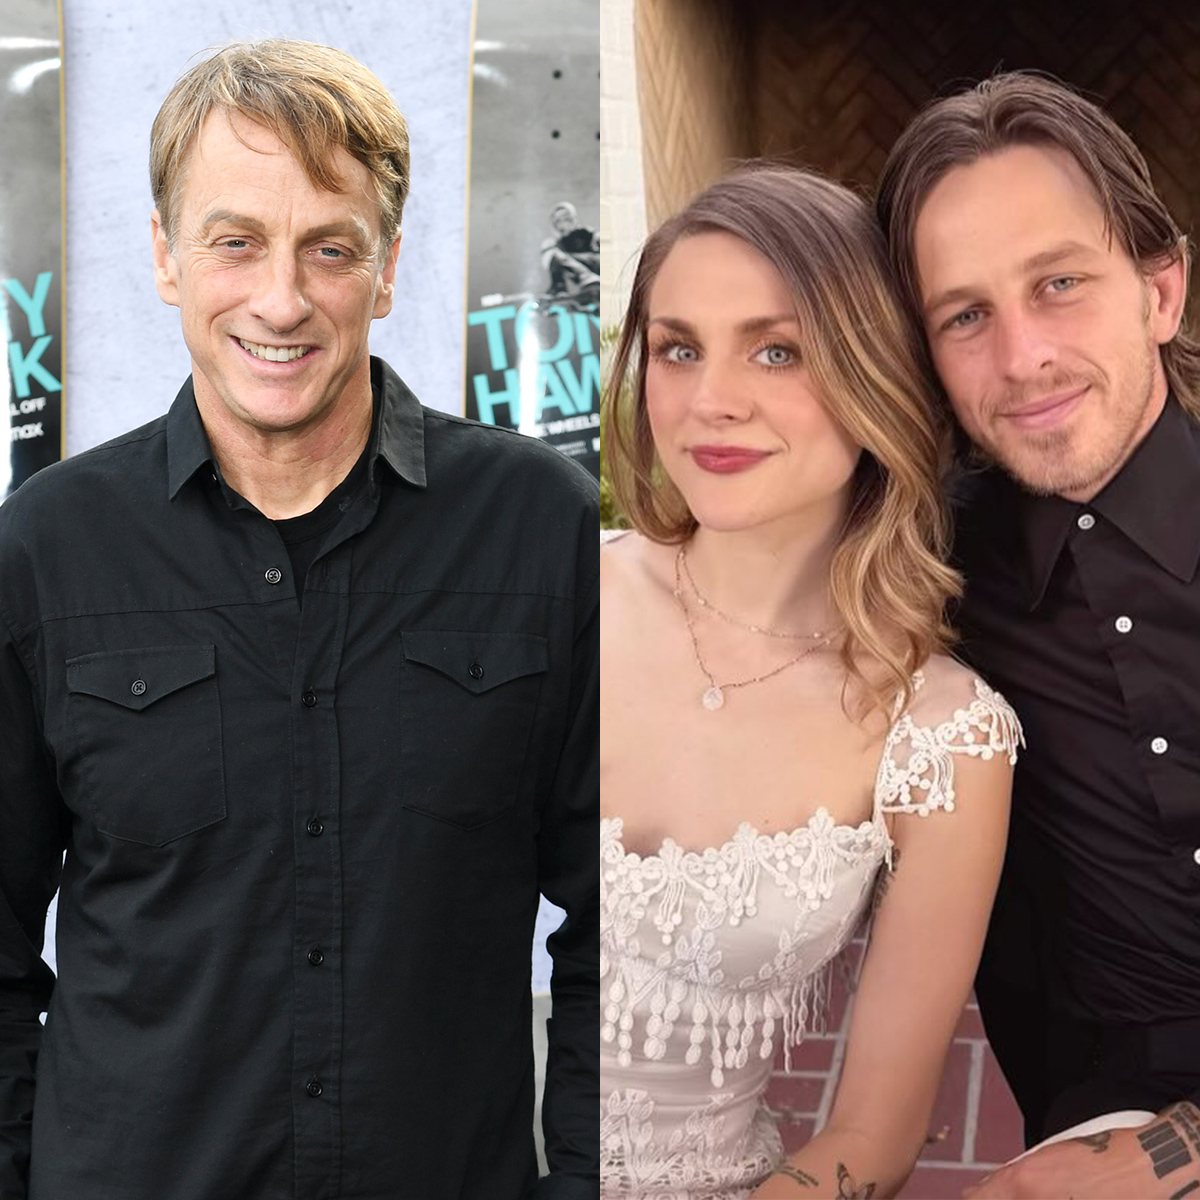 Tony Hawk Shares First Glimpse of Son Riley’s Wedding to Frances Bean Cobain